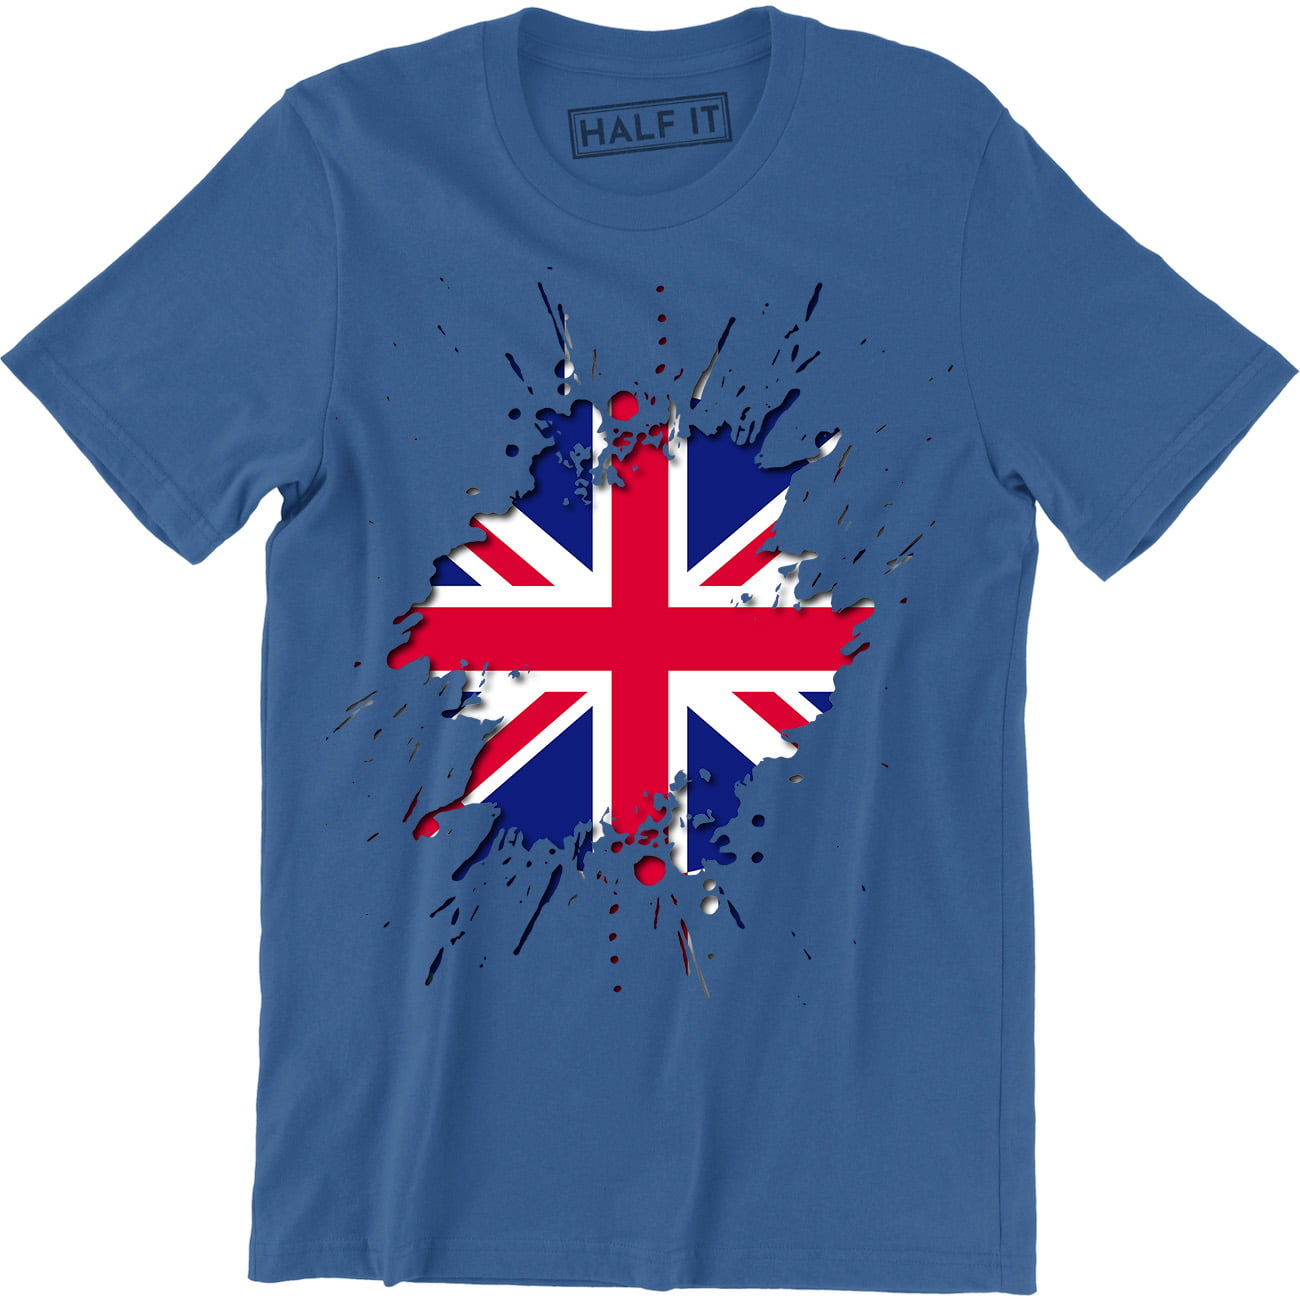 Torn Union Jack Flag Funny Men's Country British Fashion Sport Tee ...